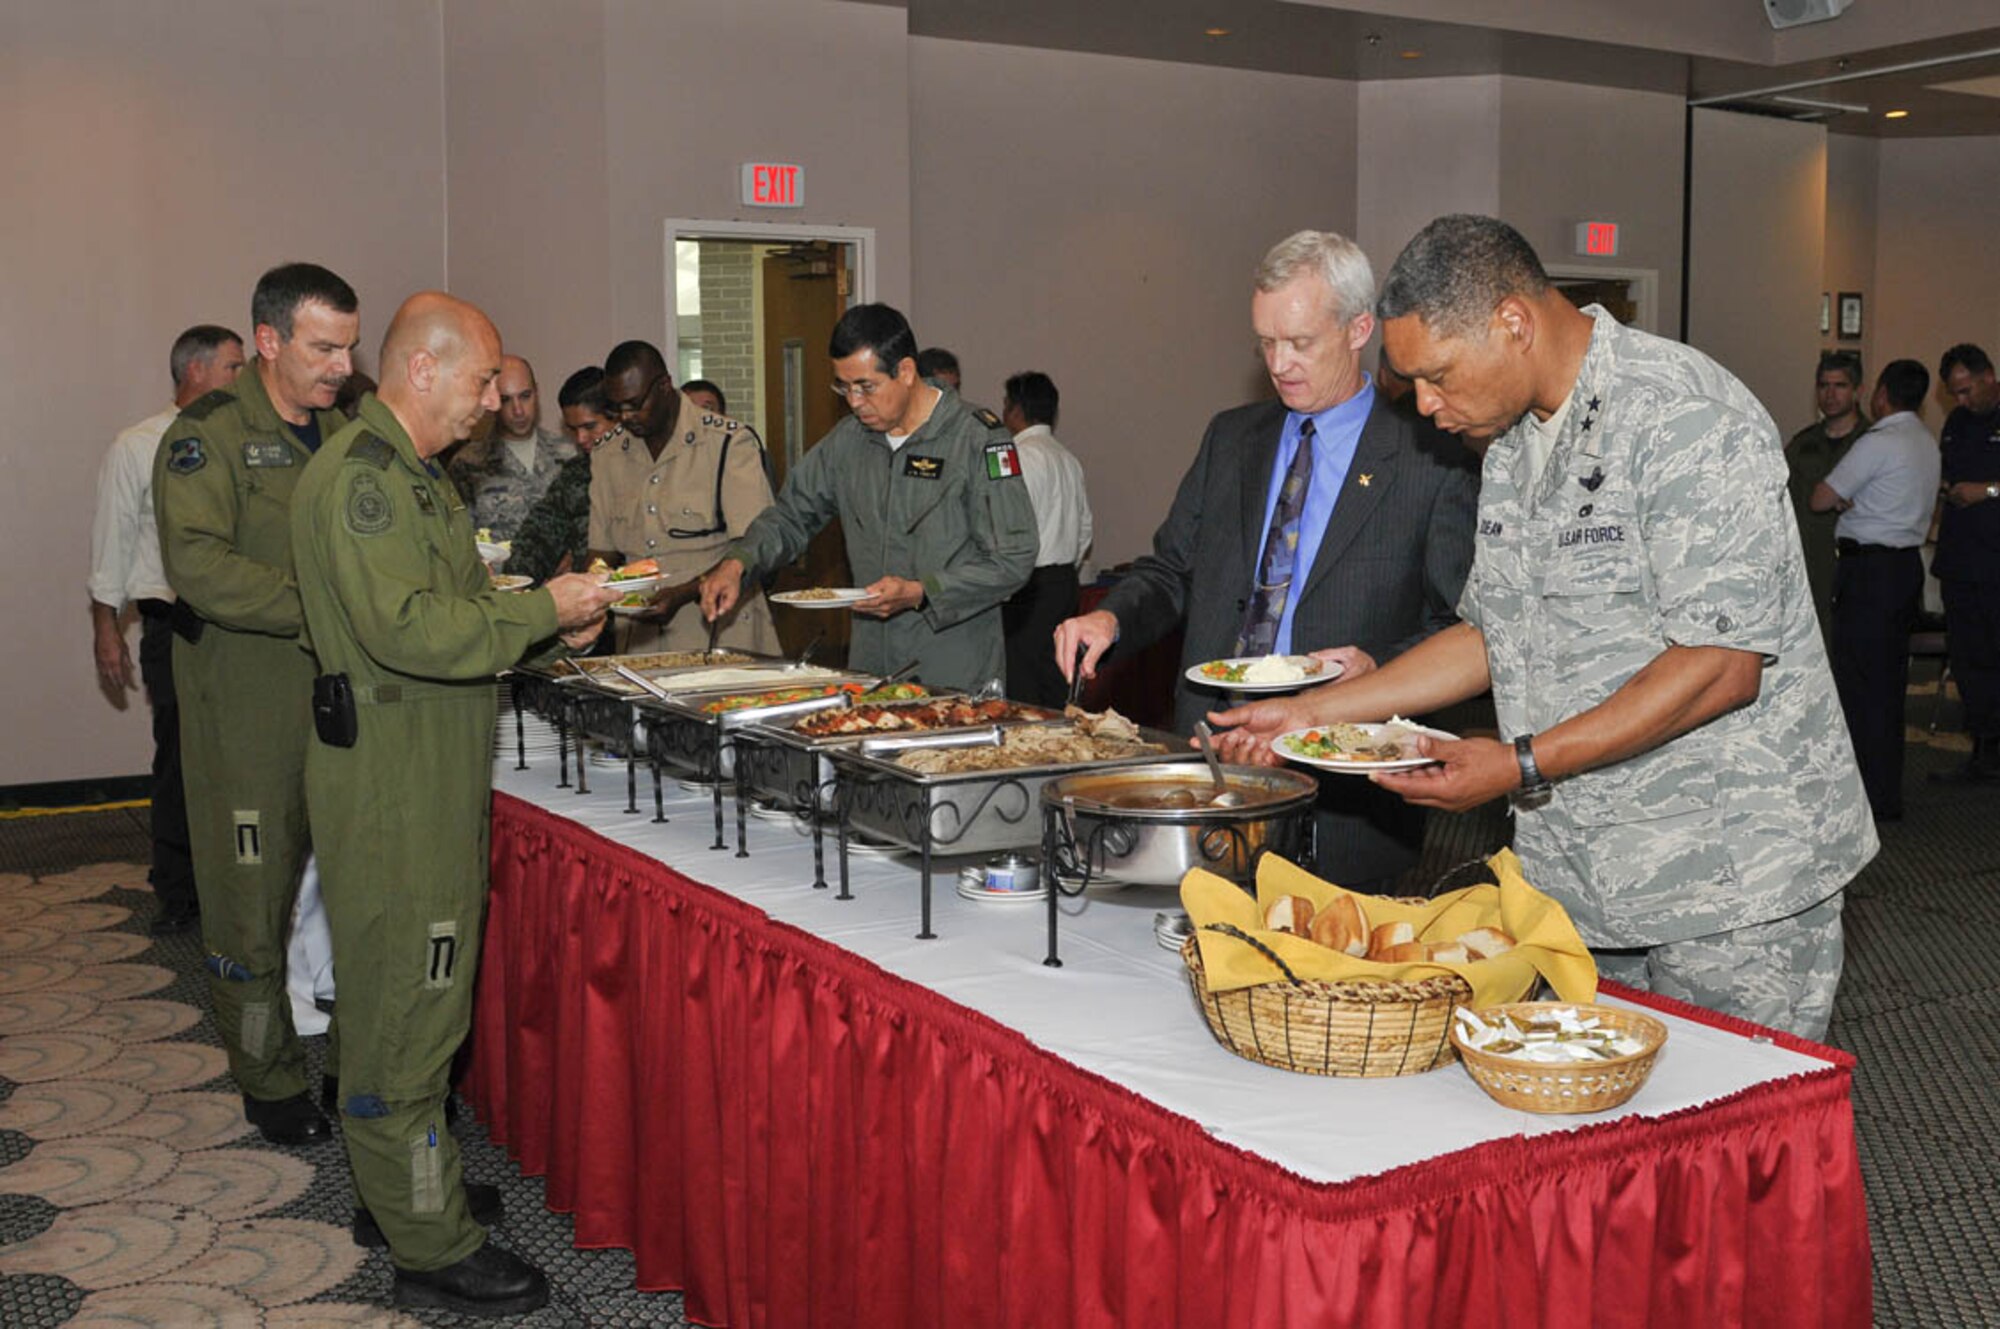 Maj. Gen. Garry C. Dean, Air Forces Northern commander (far right) initiates the lunch buffet during the North American Regional Air Chiefs Conference held at Tyndall AFB, Fla., July 12-15, 2010.  “Our aim, through open and frank discussions, was to positively impact regional air domain issues,” said General Dean.  (U.S. Air Force photo by Lisa Norman)